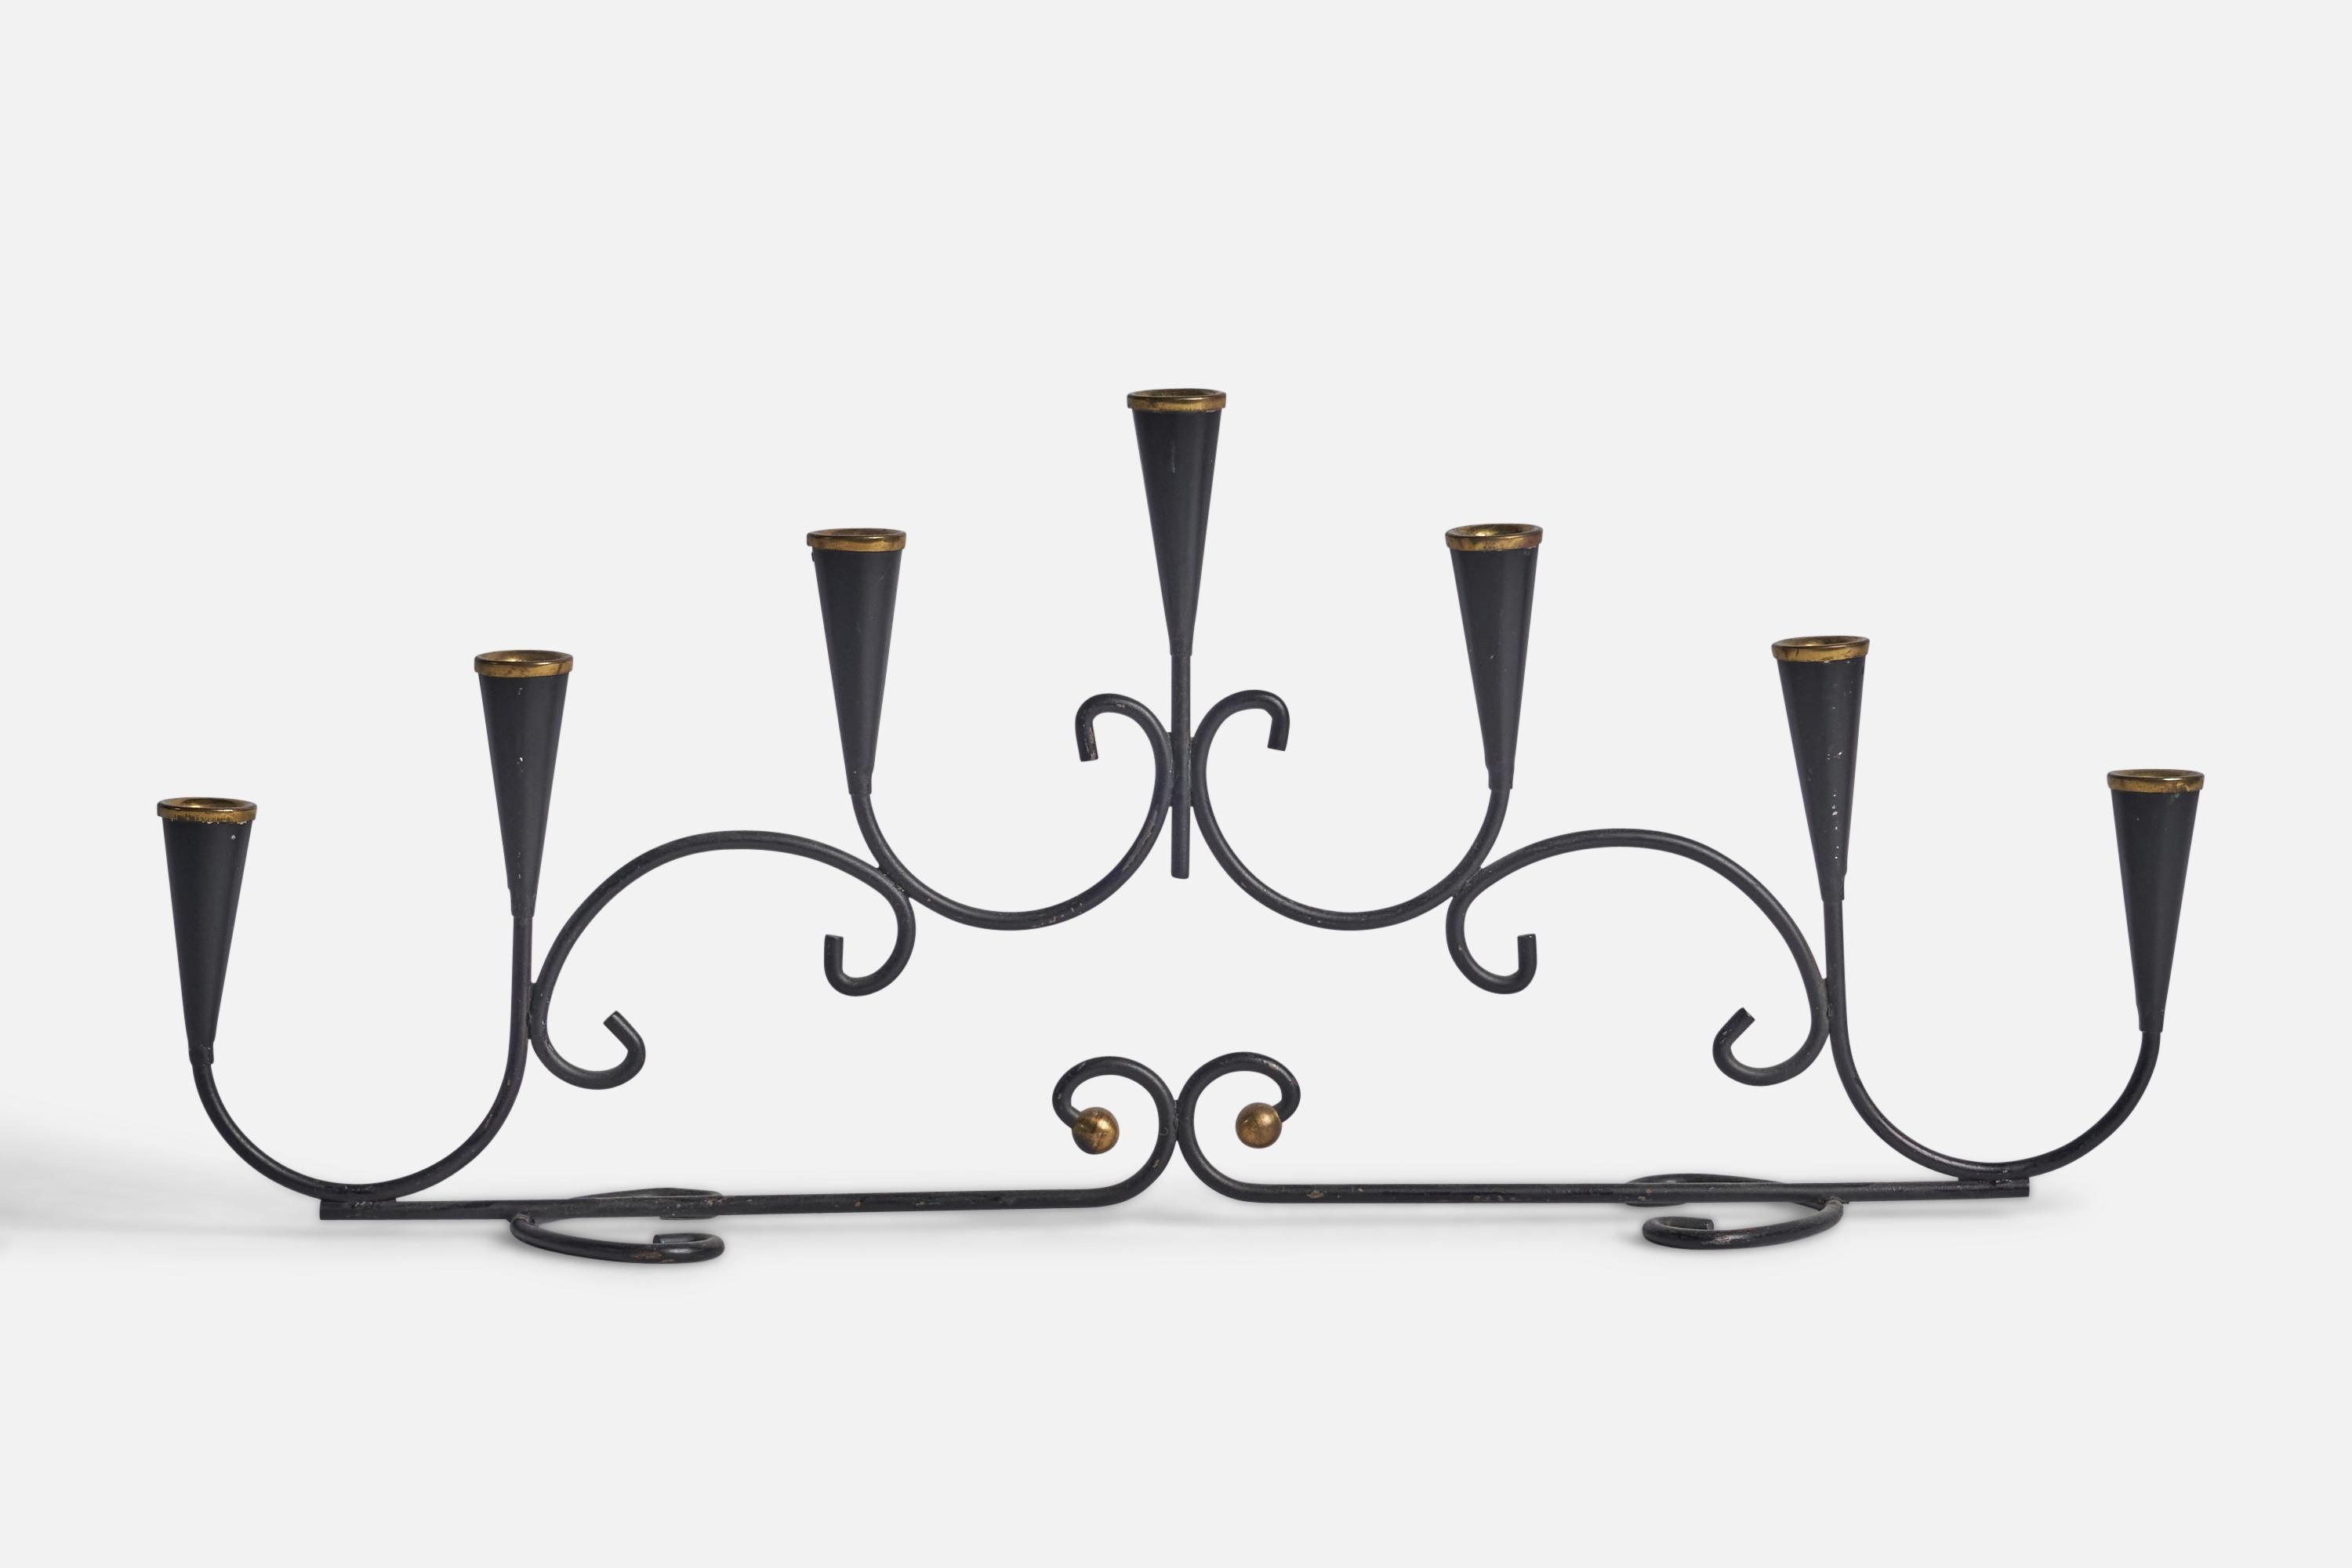 A black-painted metal and brass candelabra designed and produced in Sweden, 1960s.

Holds 0.5” candles